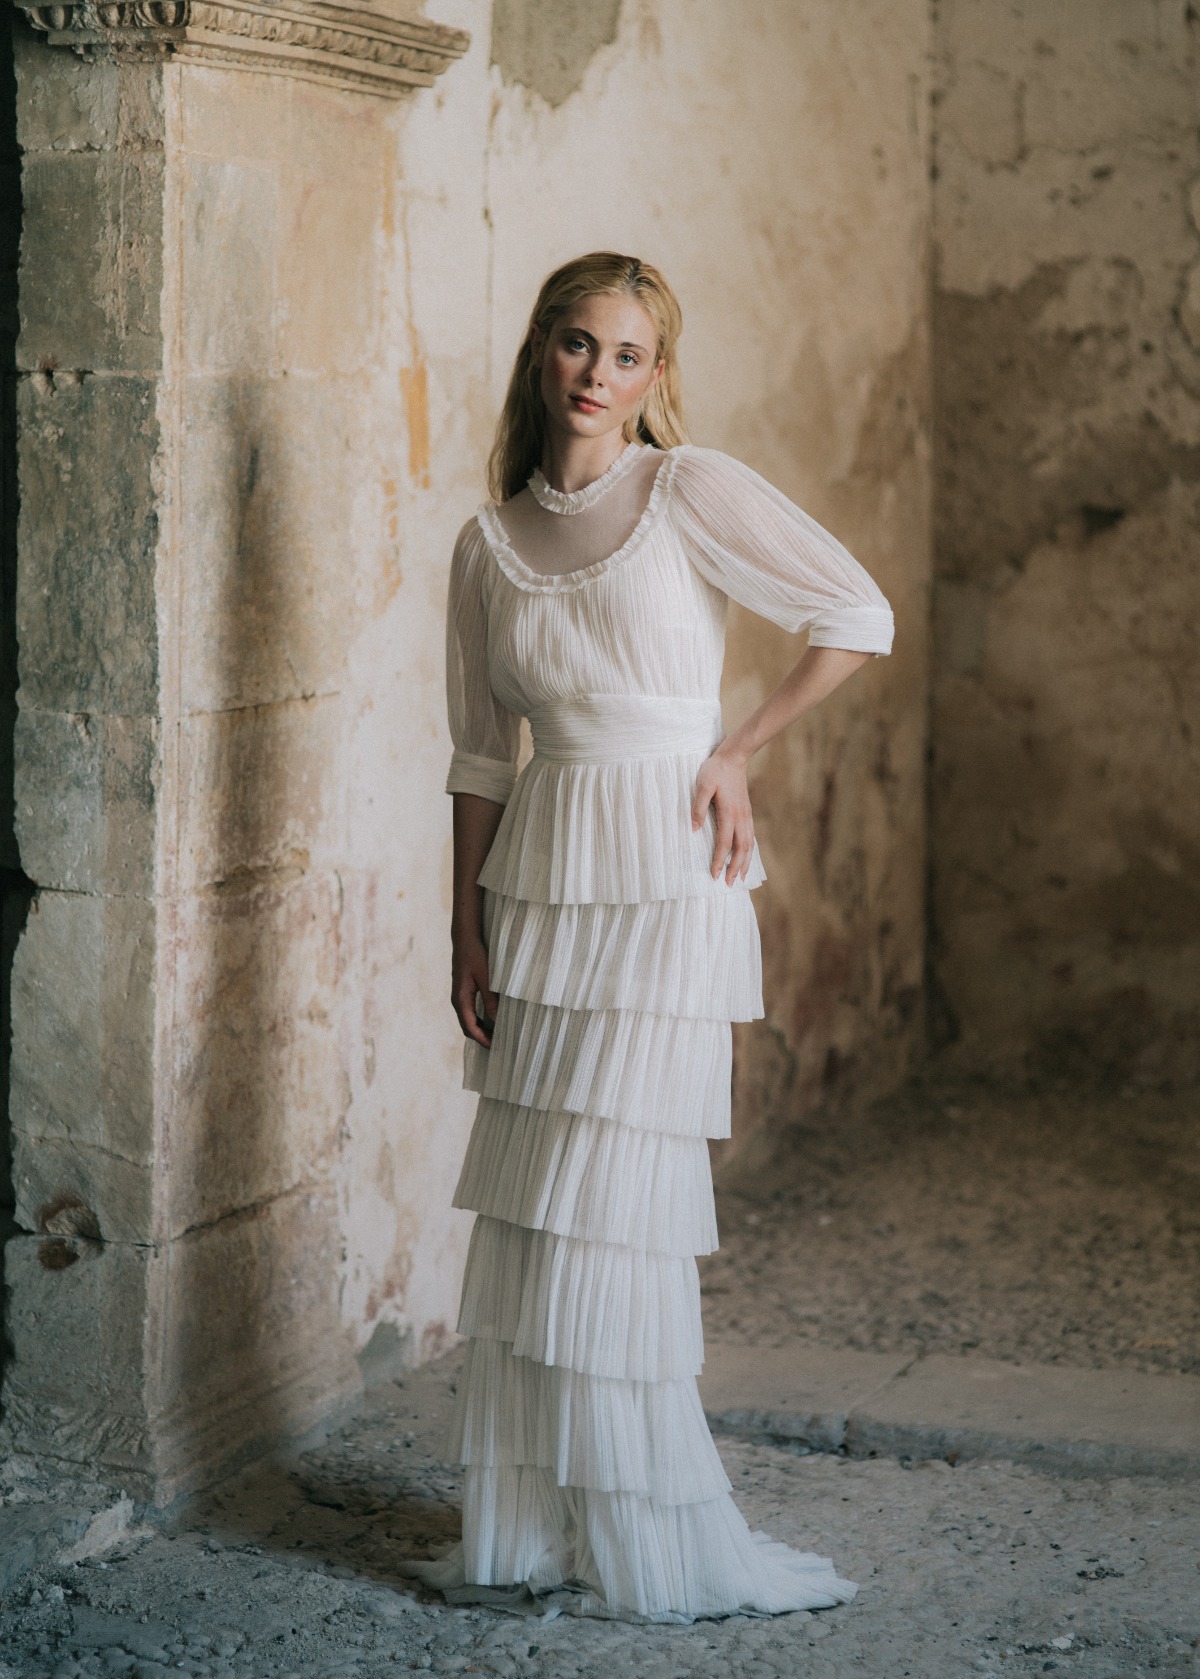 A Classic And Timeless Editorial At The Marqueses de Viana Palace